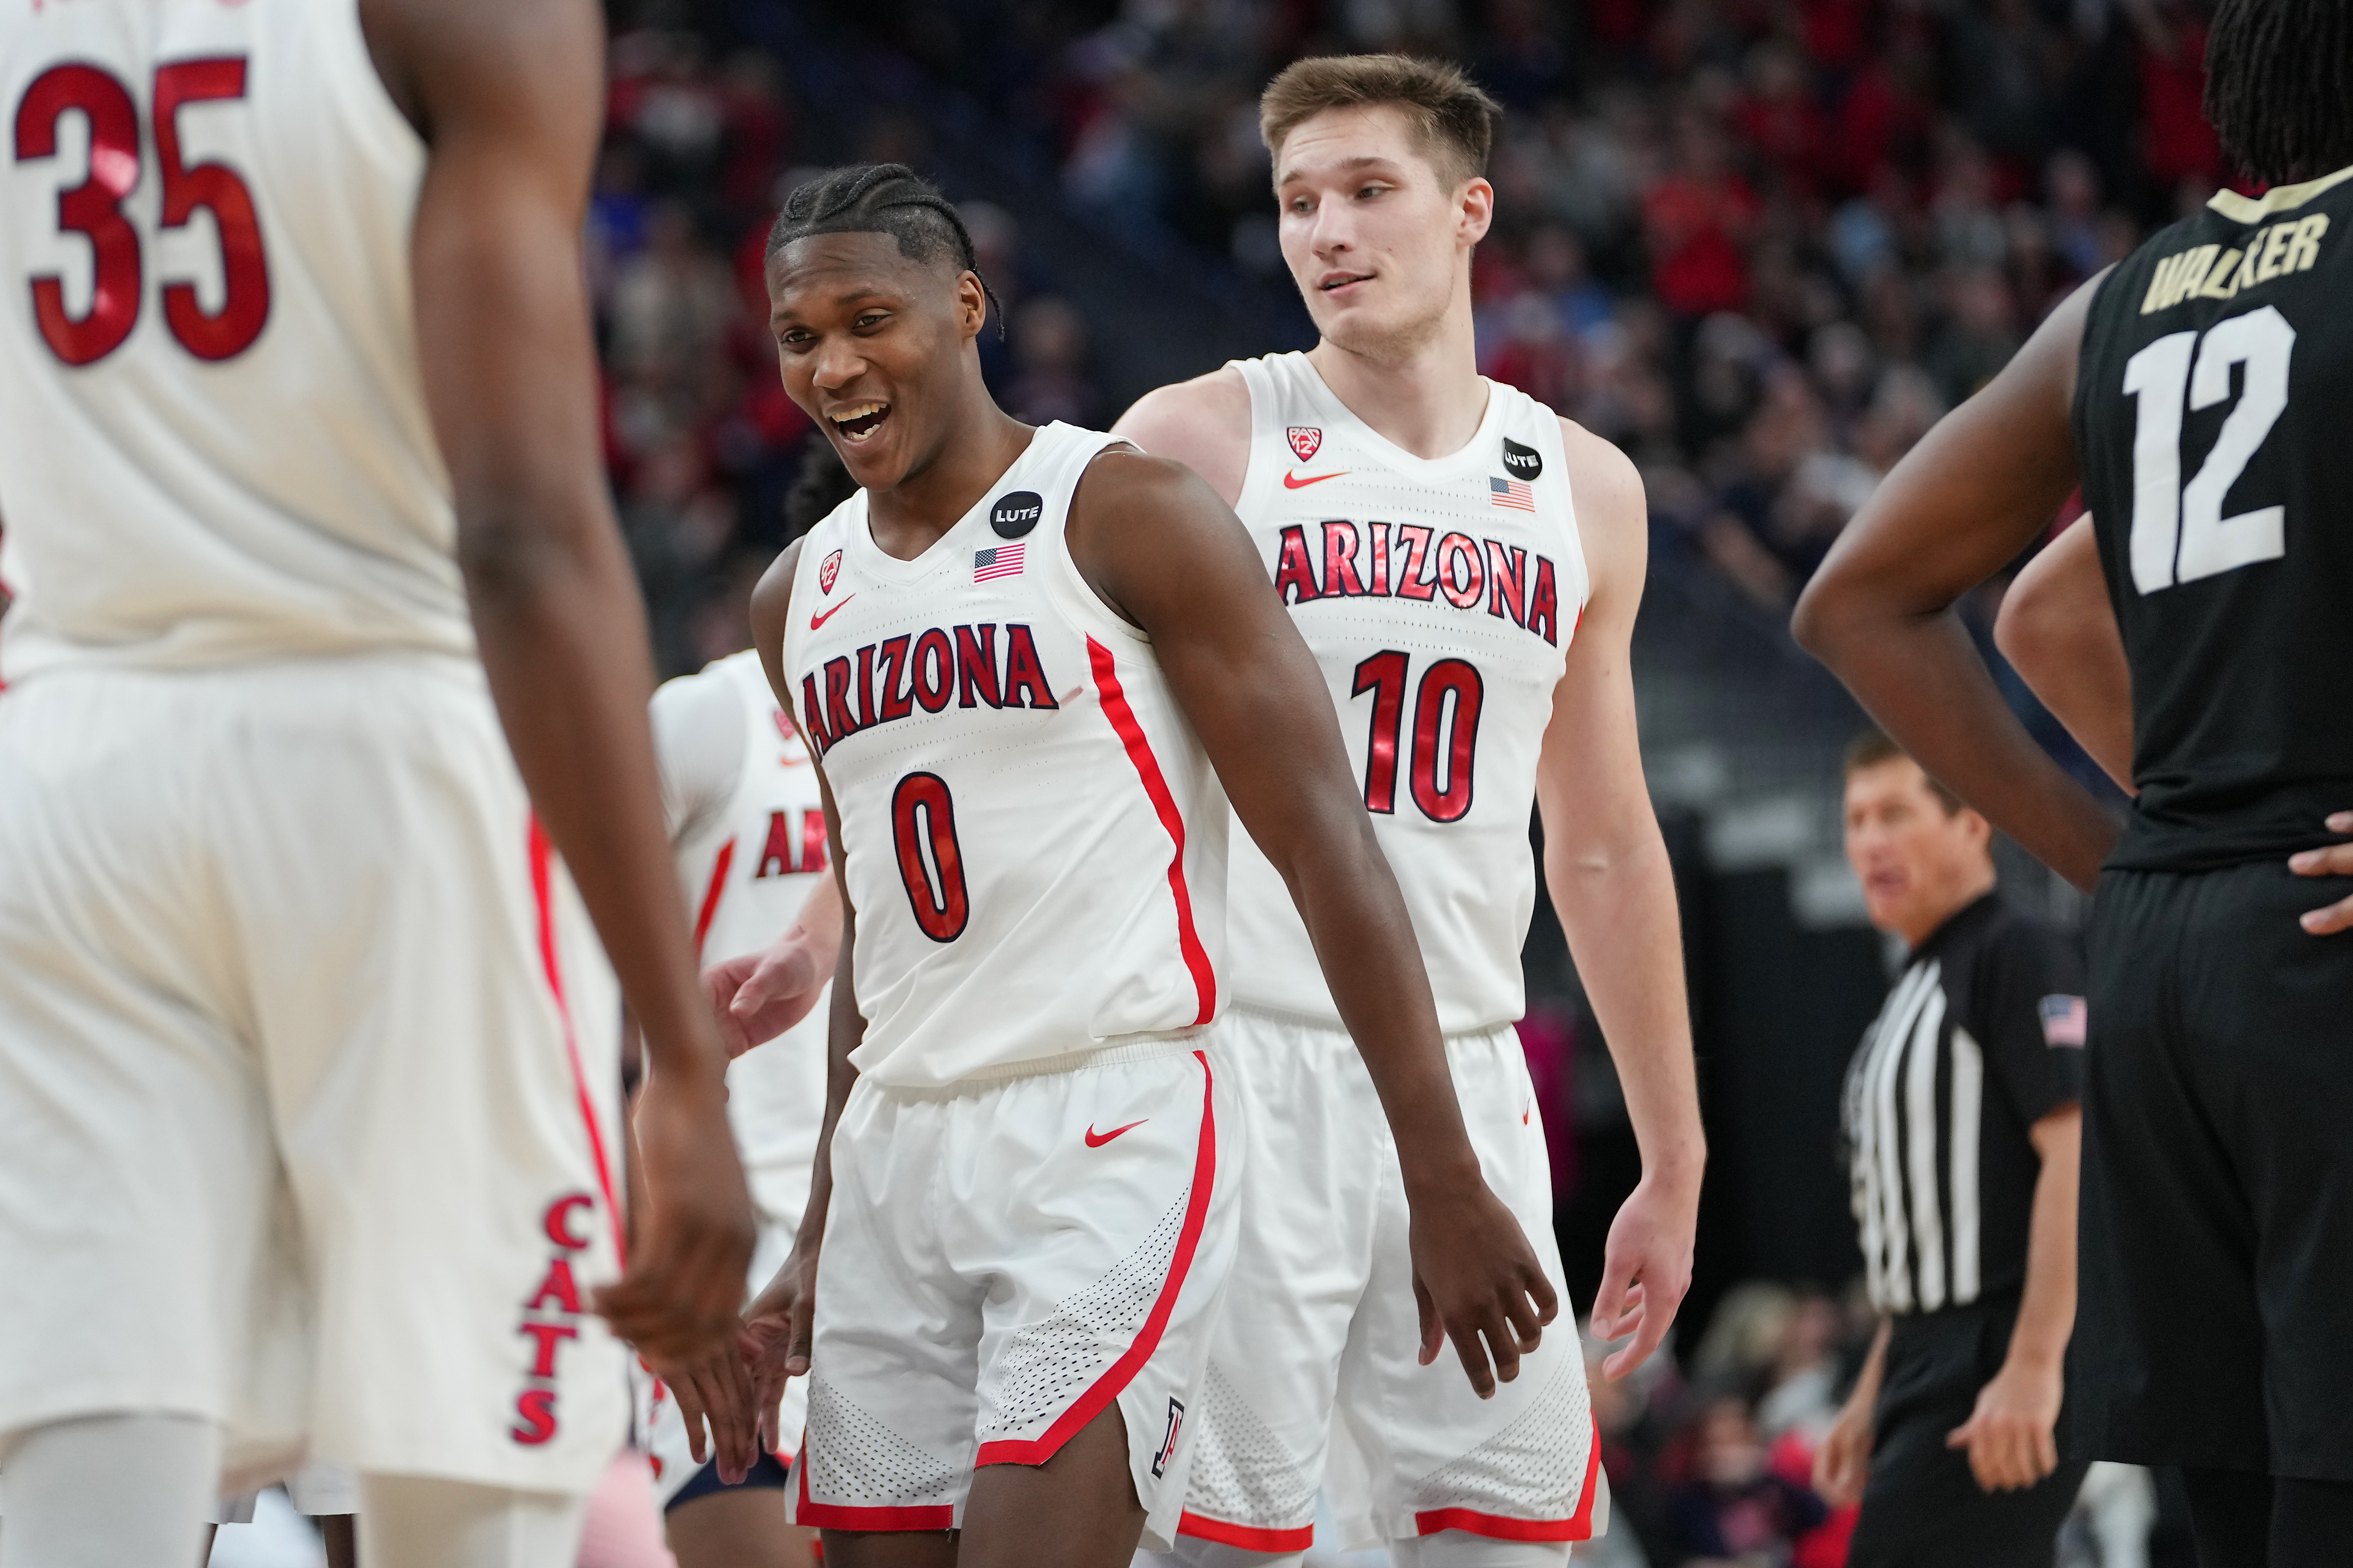 Arizona Wildcats guard Bennedict Mathurin and Arizona Wildcats forward Azuolas Tubelis celebrate after the Wildcats defeated the Colorado Buffaloes 82-72 at T-Mobile Arena.